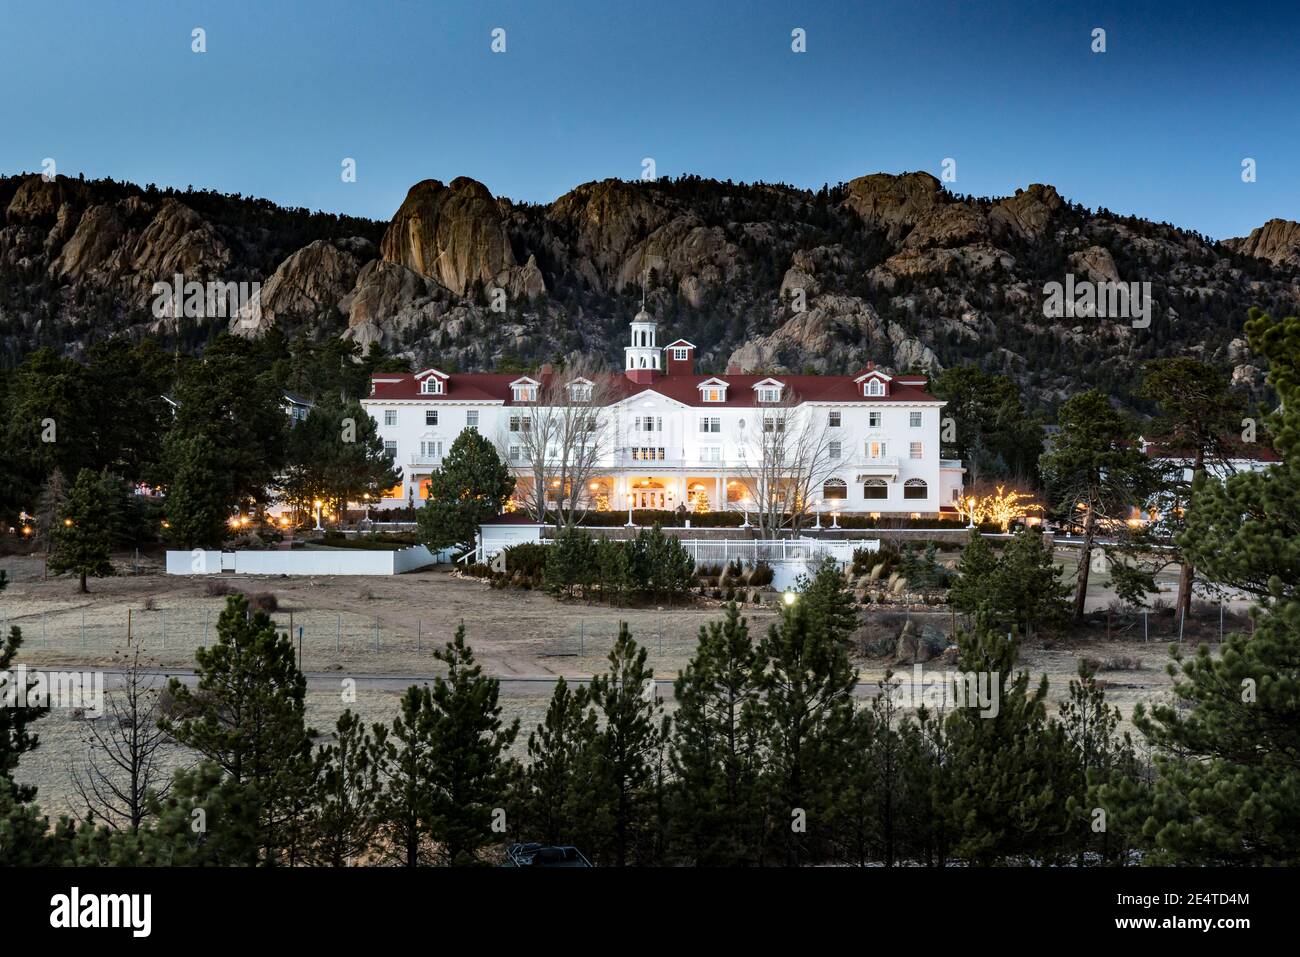 Estes Park, CO - October 31, 2020: View of the historic Staley Hotel in the Rocky Mountains of Estes Park at night Stock Photo